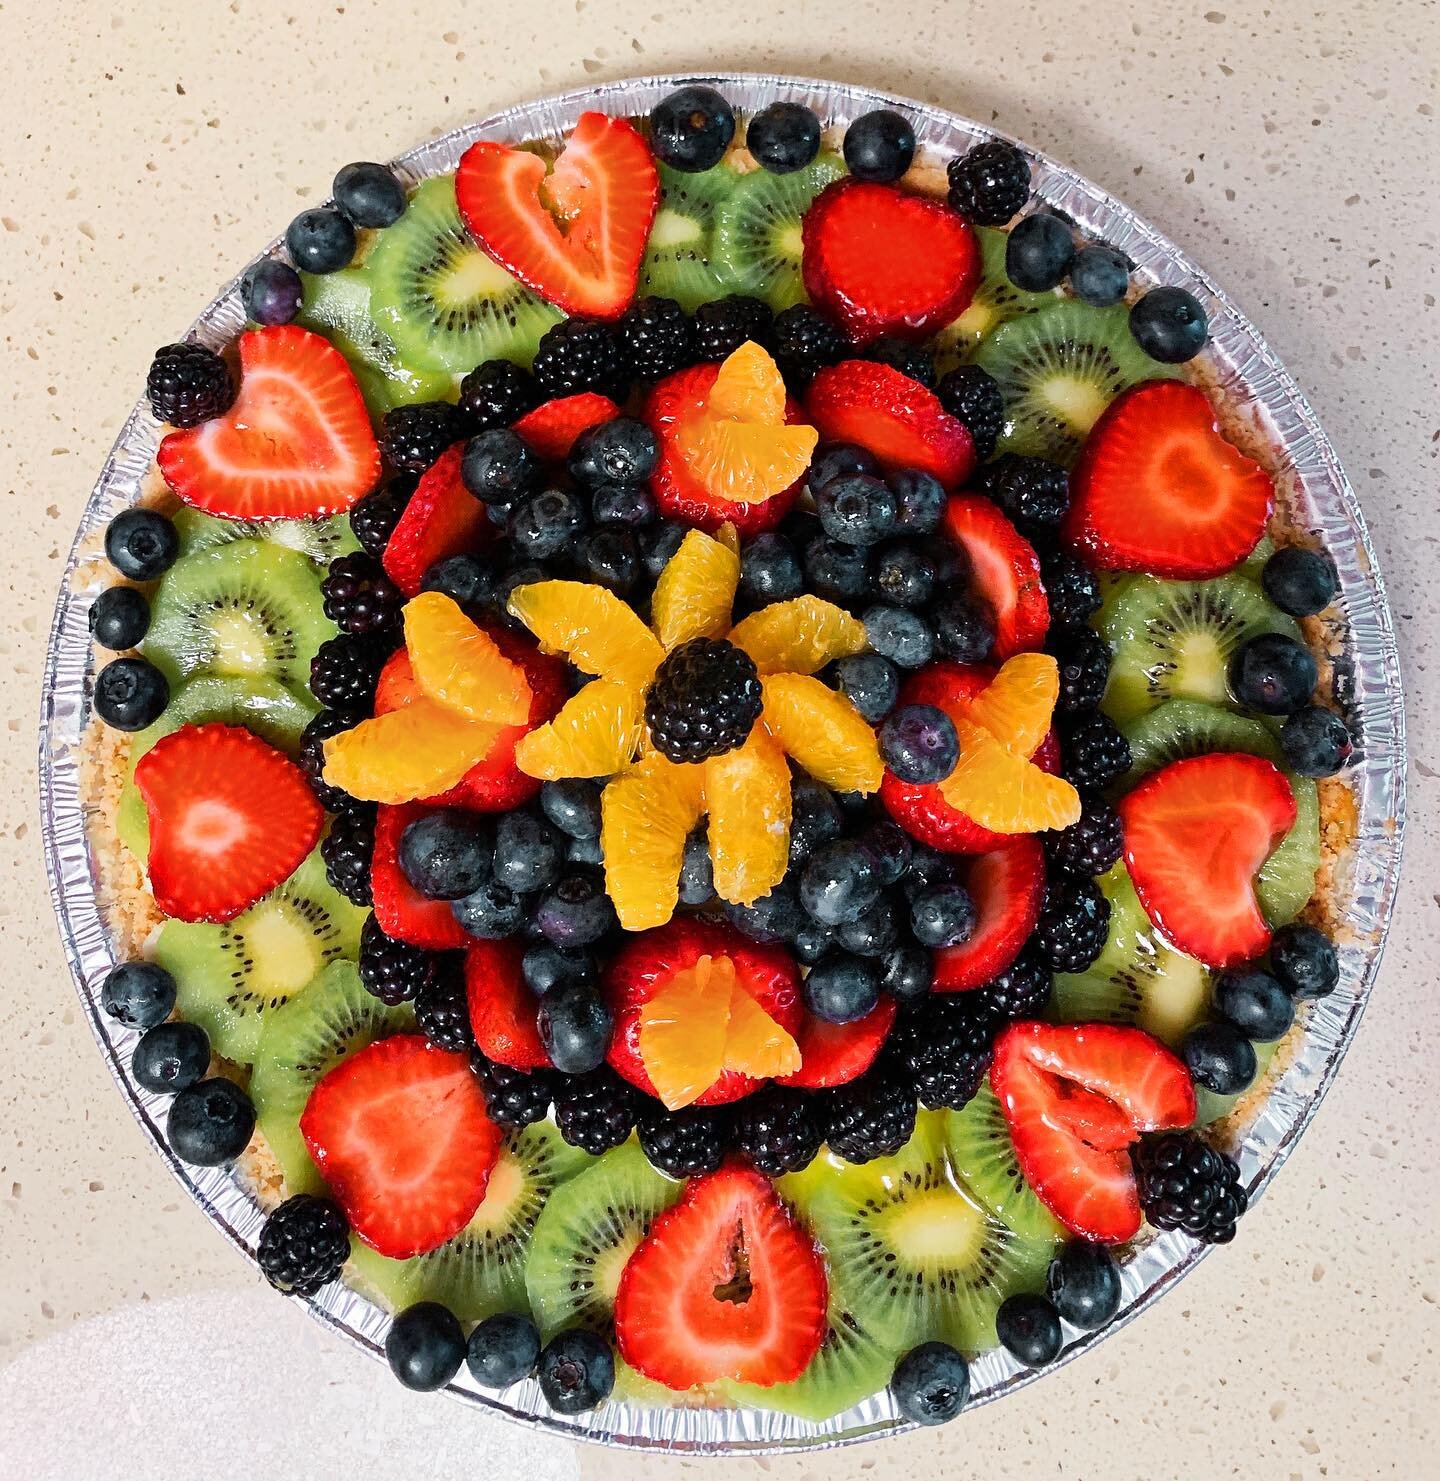 How do we know summer is close? &mdash;When all were craving are fruit tarts! Order yours today! They are berry good!😉🥝🍓🍋🍇🥭🍒🍑 #fruittart #summertreats #summersweets #anageesbakes #sweet #summervibes #summersweetfruits #fruits #kiwi